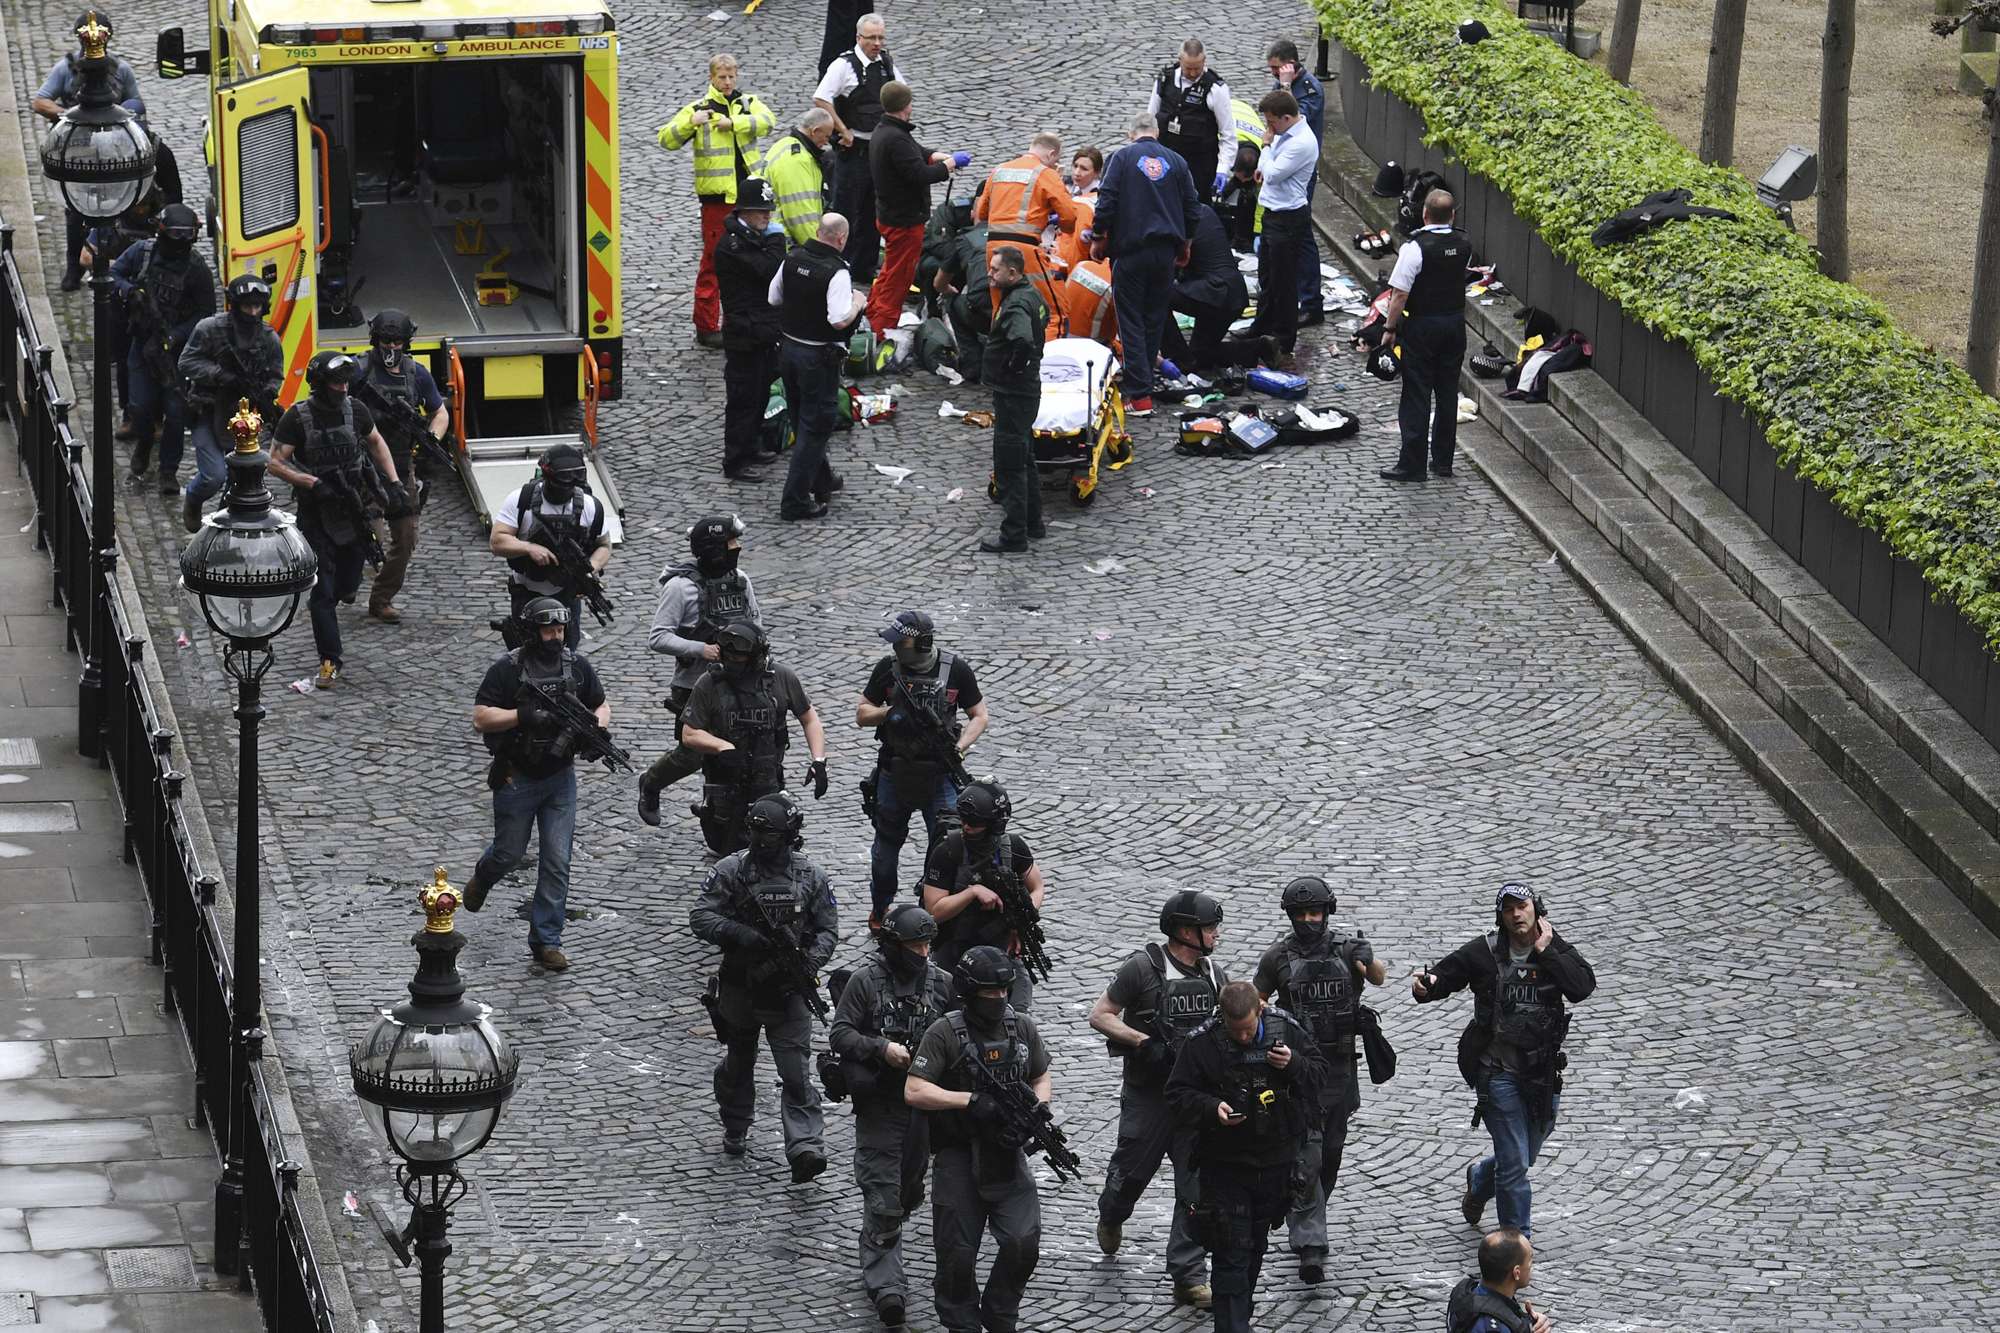 Armed police walk past emergency services attending to injured people outside the Houses of Parliament in London on Wednesday. Photo: AP